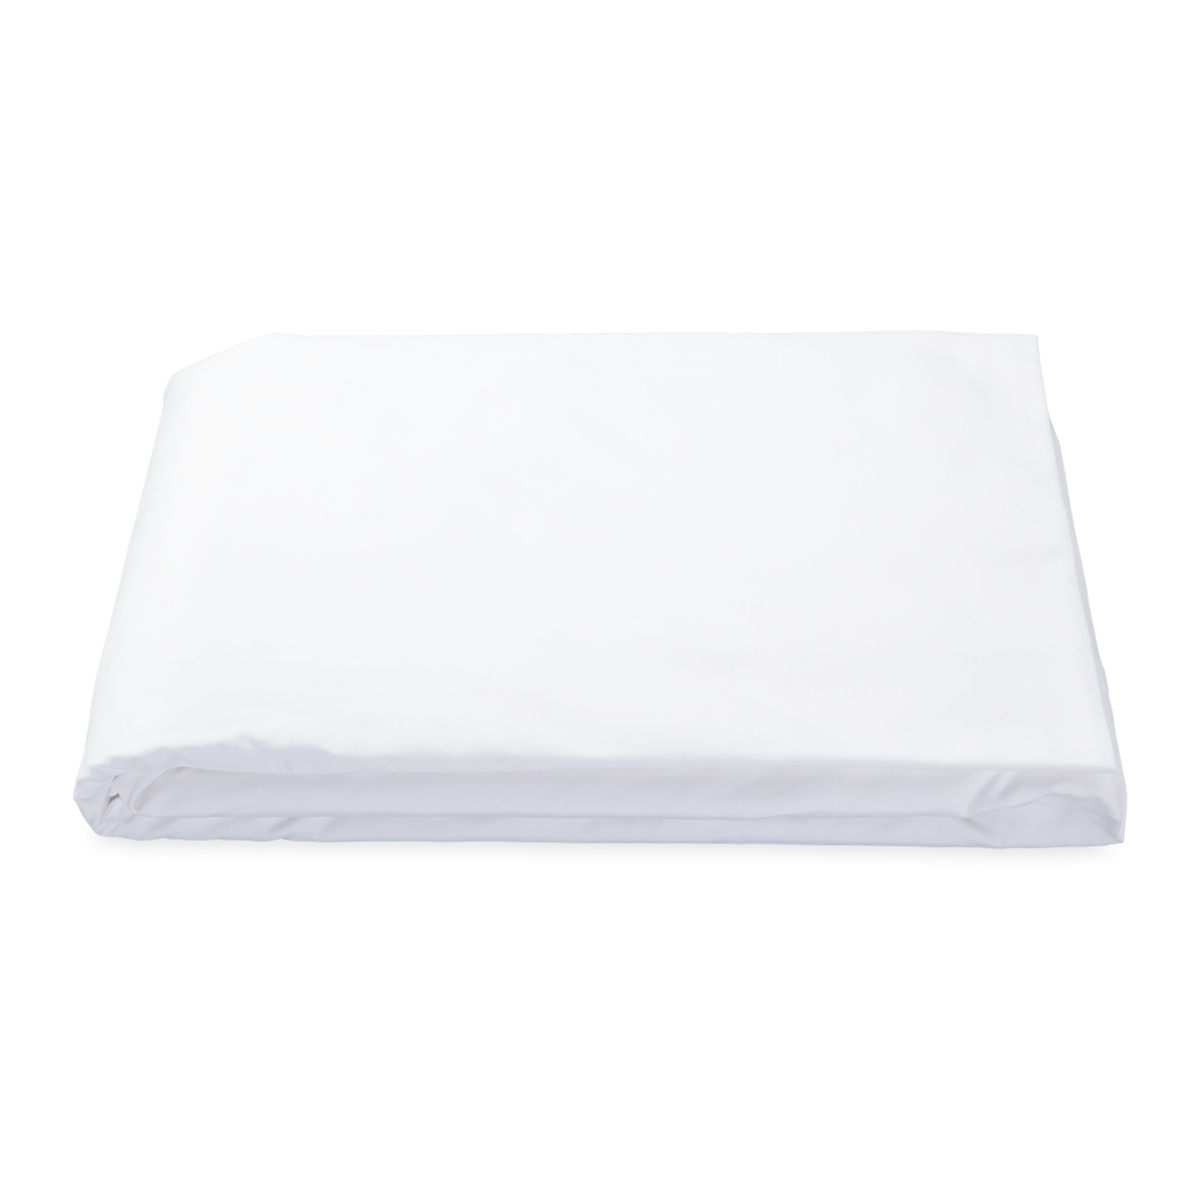 Fitted Sheet of Matouk Luca Hemstitch Bedding in White Color